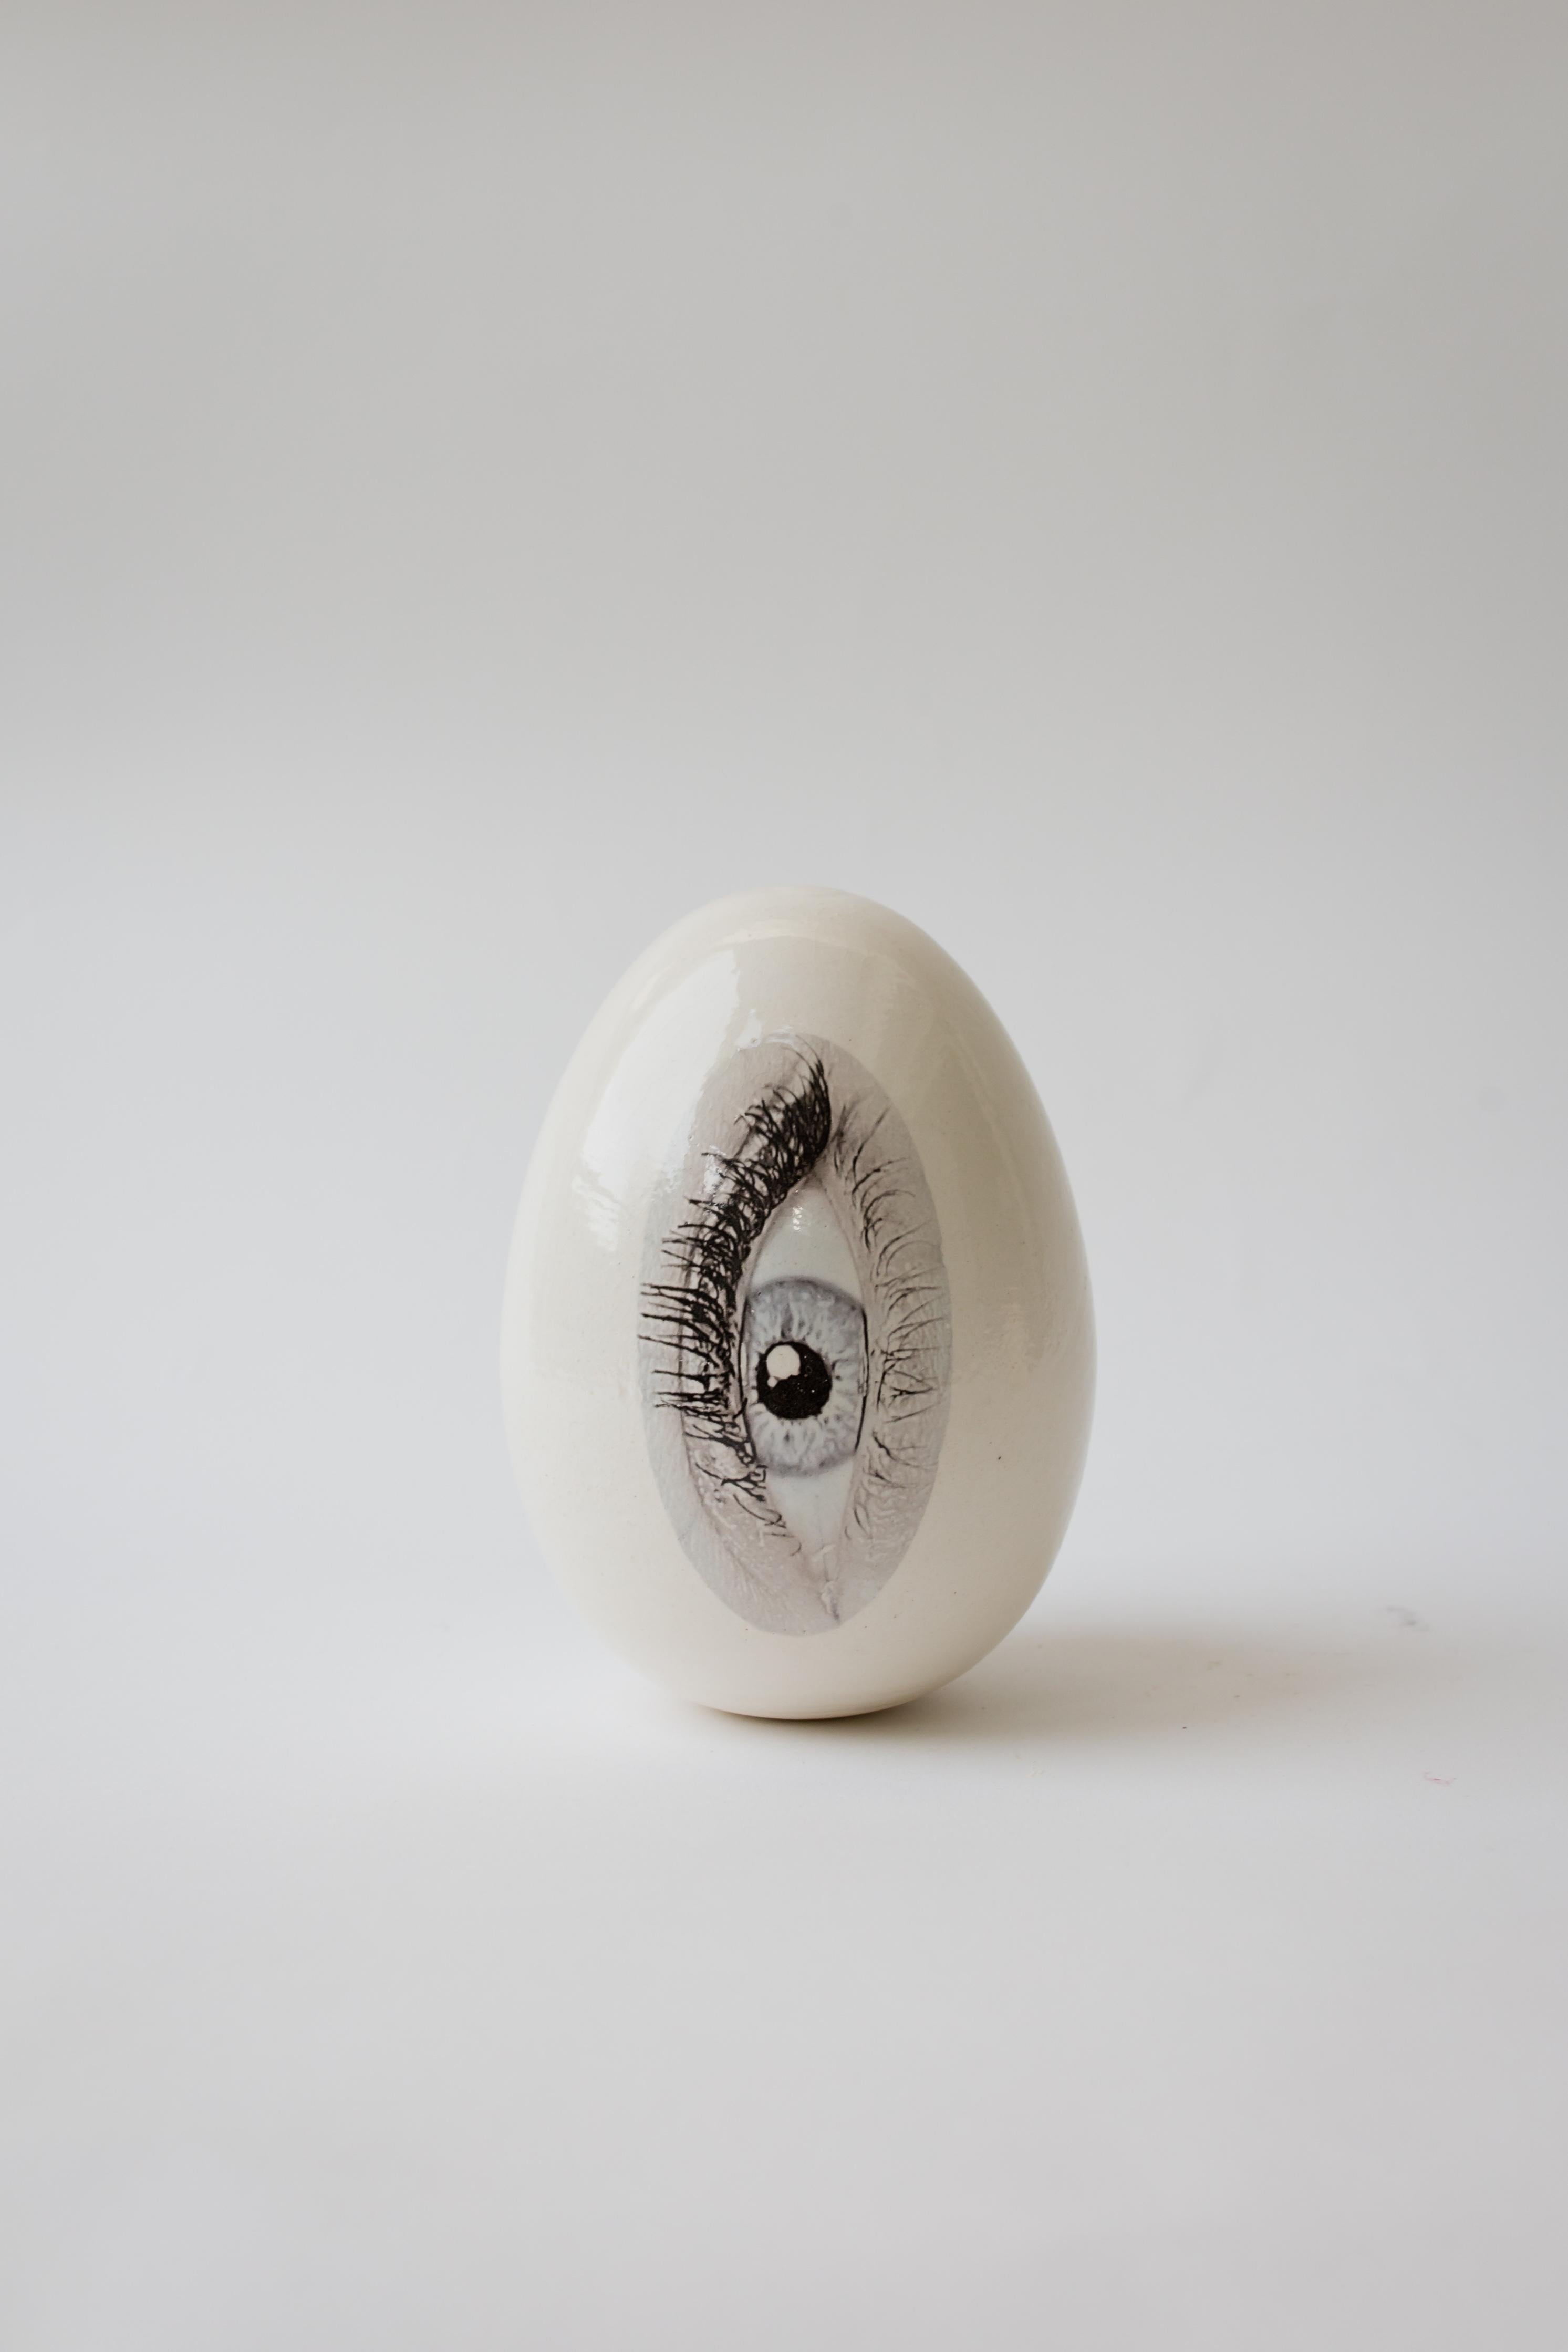 Good eye ceramic egg sculpture for home, office decor, collector piece.
handmade in the picturesque village Arsuf in Israel is an art piece for designers and architects as well as home owners.
Harmony and grandeur characterize the work of Reli Smith